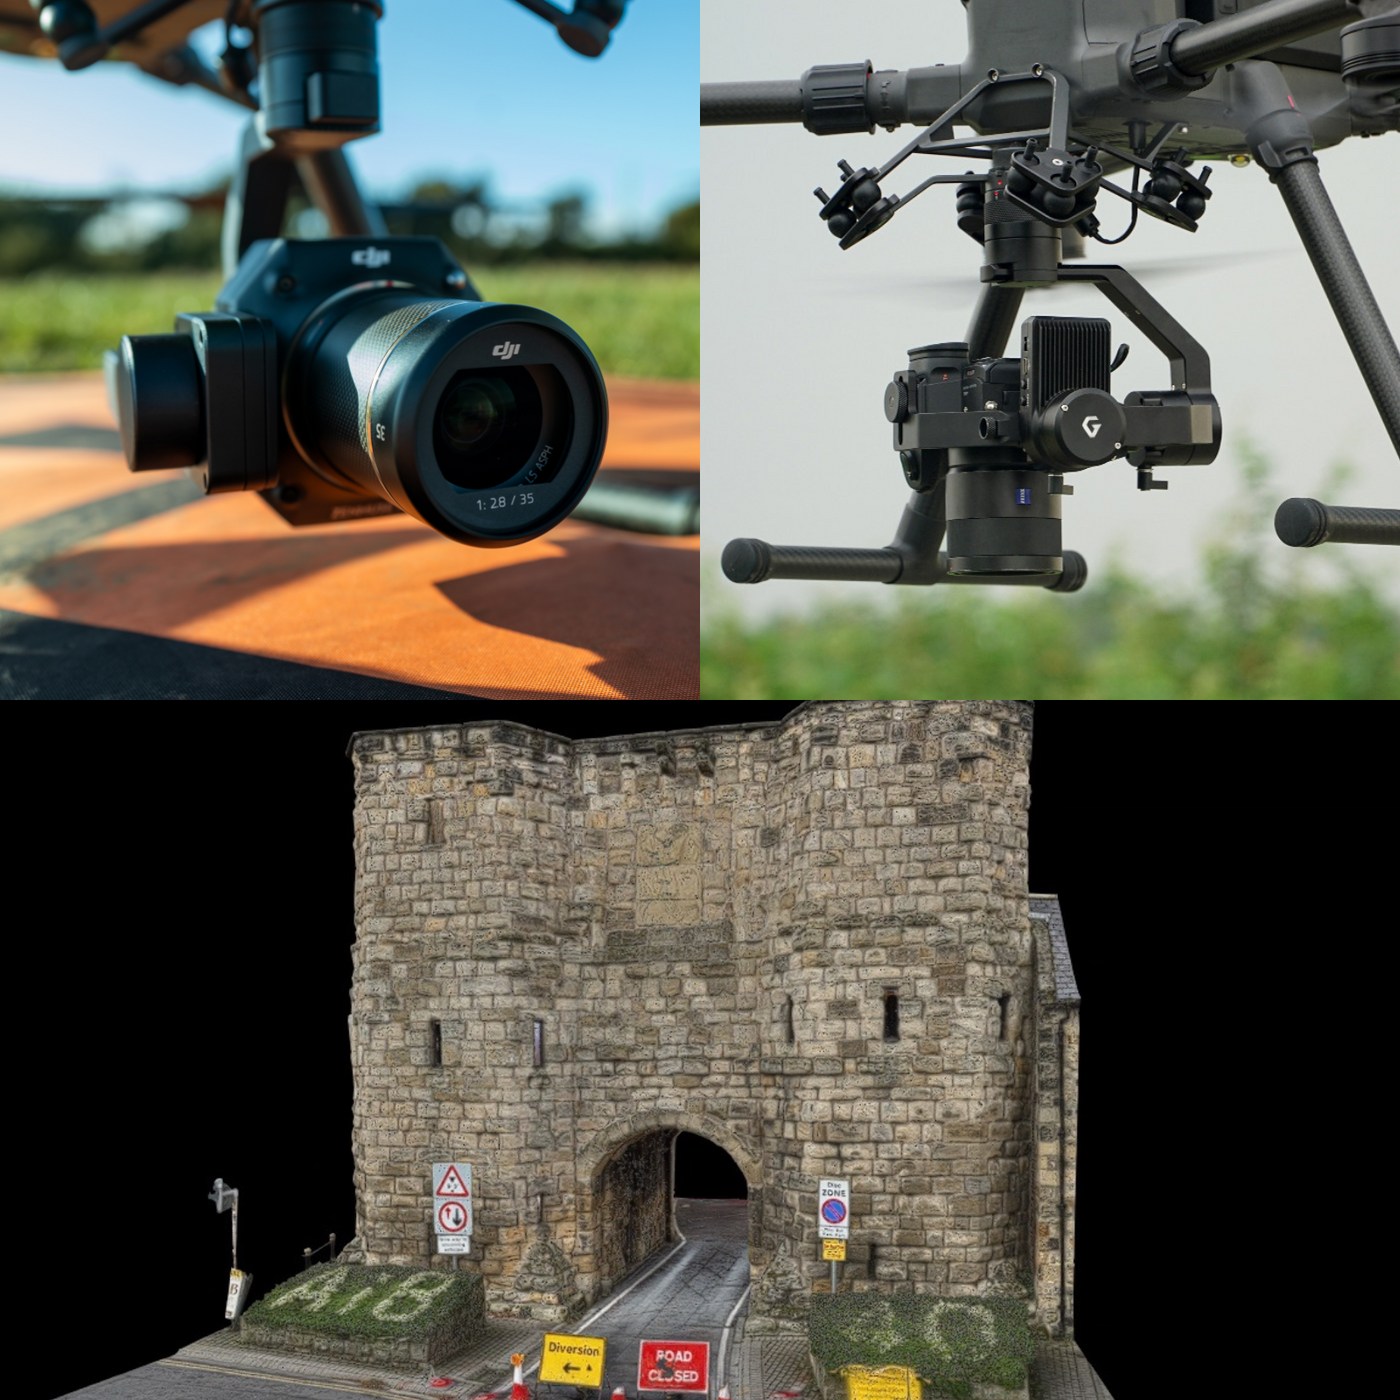 How To Pick The Best Camera For Drone Photogrammetry